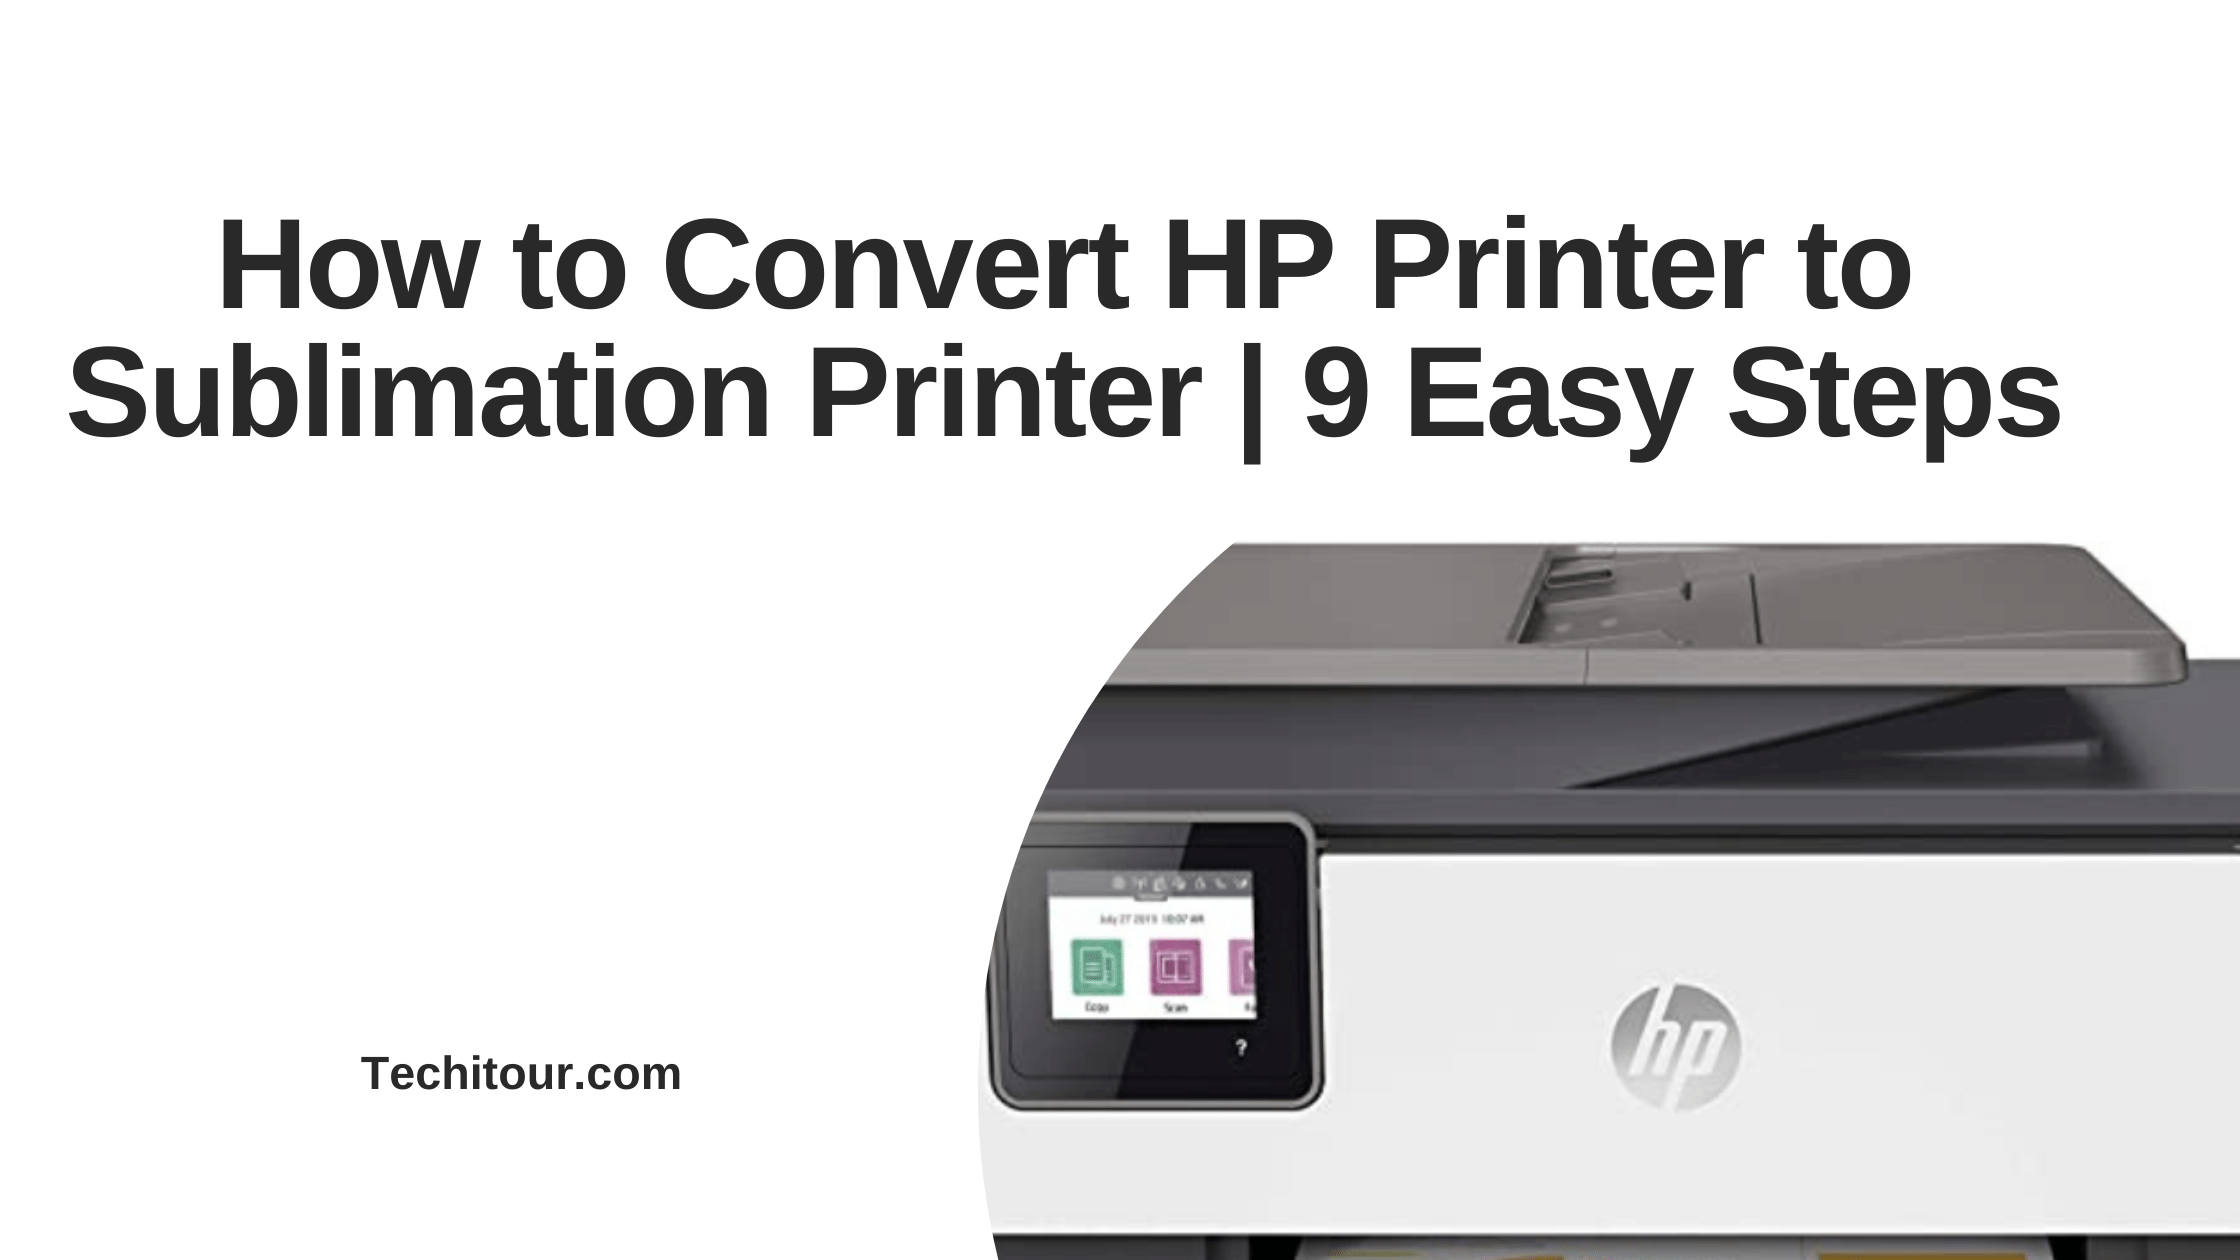 How to Convert HP Printer to Sublimation Printer | 9 Easy Steps